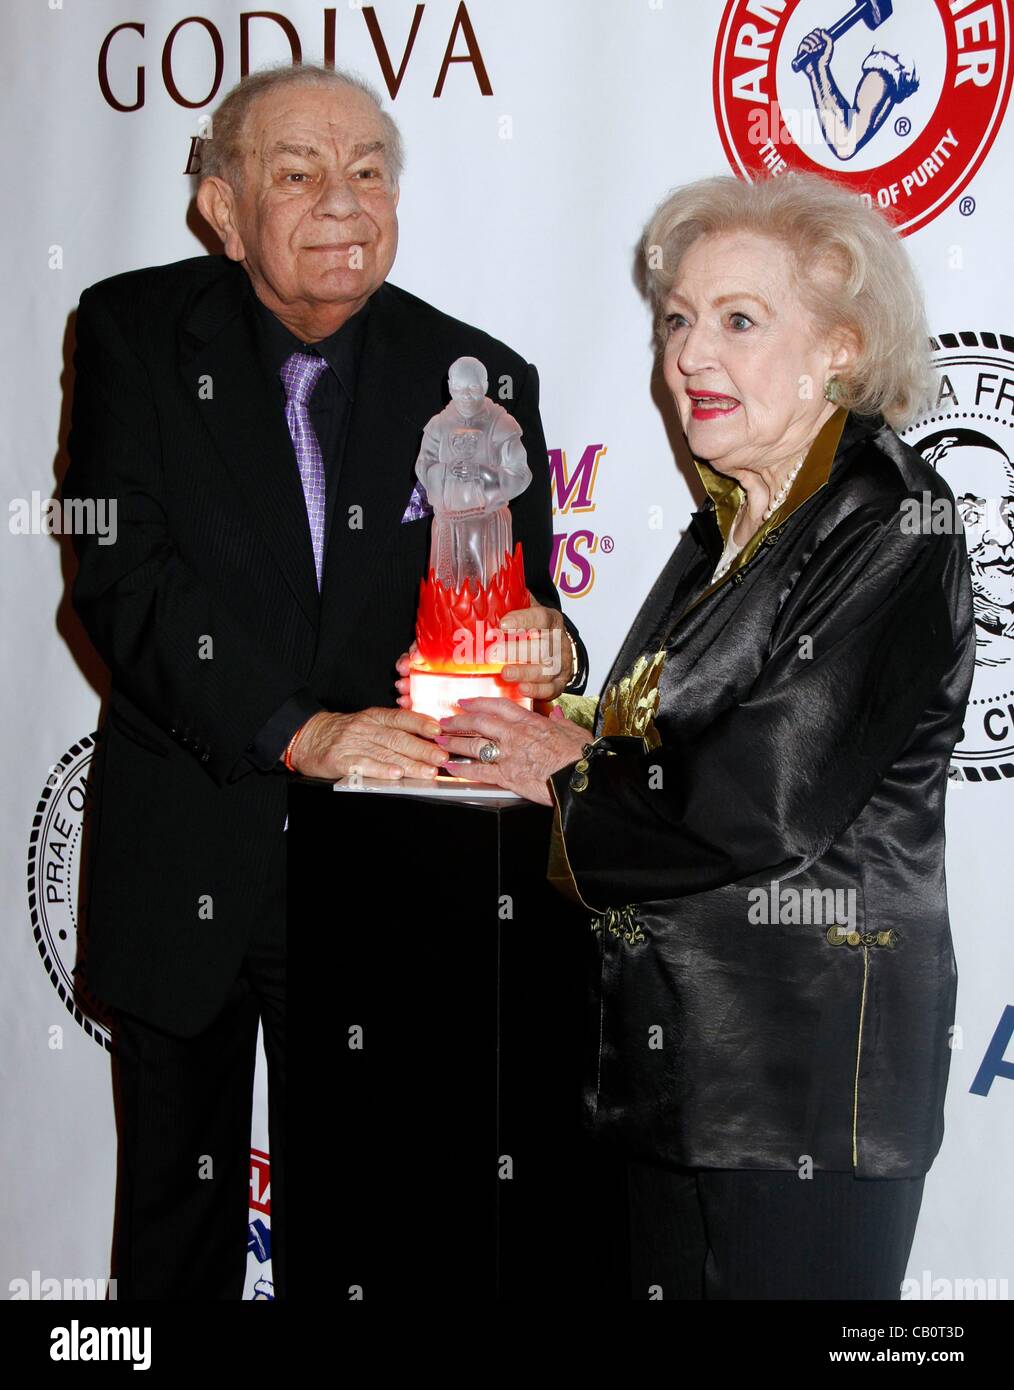 Betty White, Freddie Roman at arrivals for The Friars Club Roast of Betty White, Sheraton Hotel, New York, NY May 16, 2012. Photo By: F. Burton Patrick/Everett Collection Stock Photo